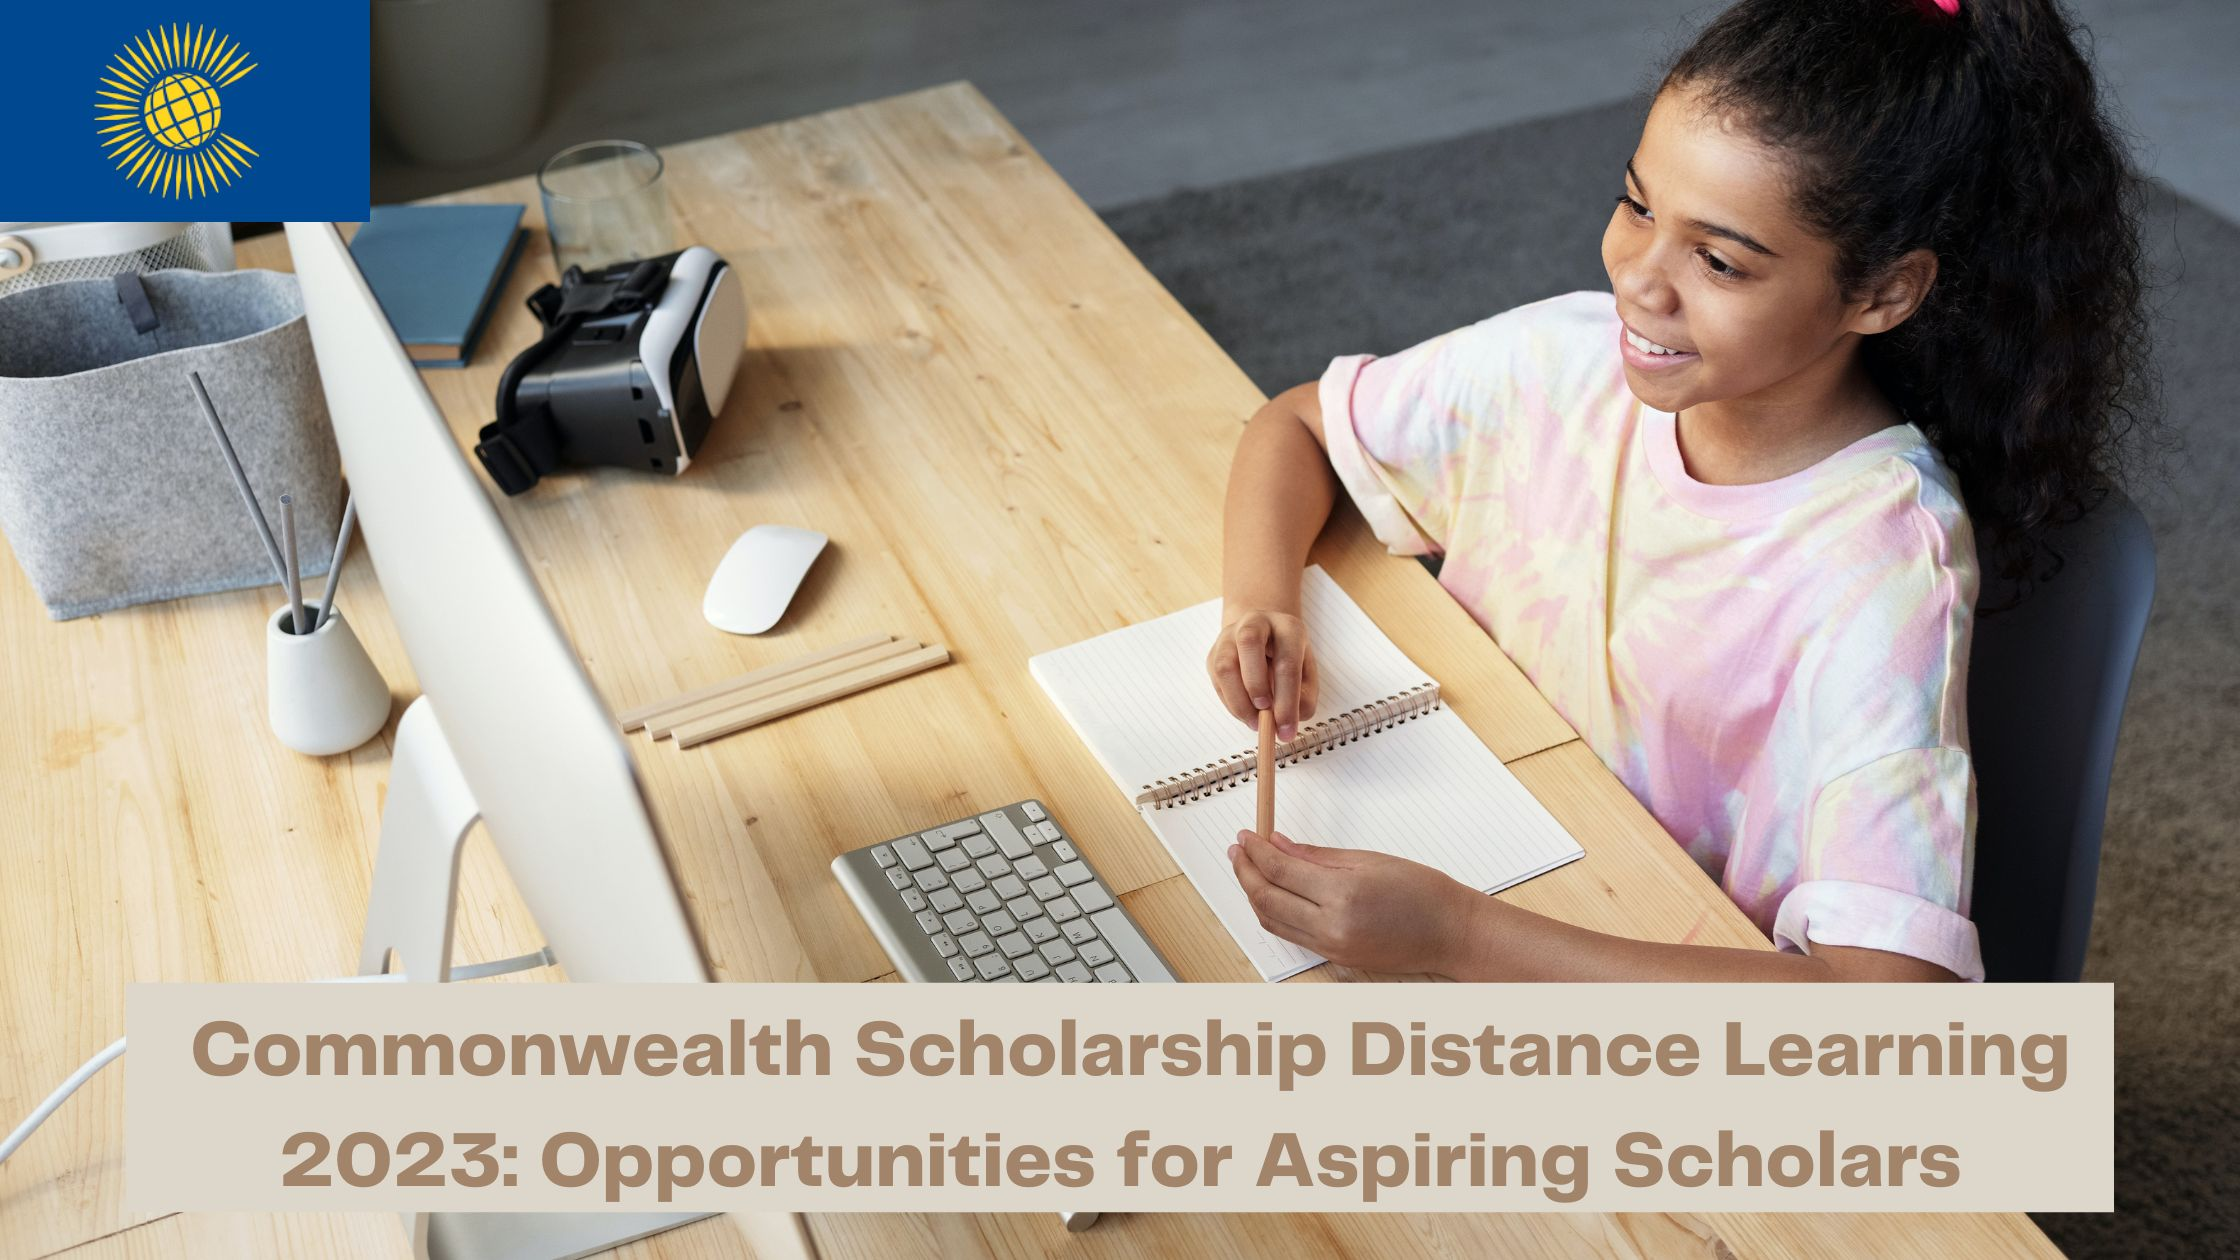 Commonwealth Scholarship Distance Learning 2023: Opportunities for Aspiring Scholars